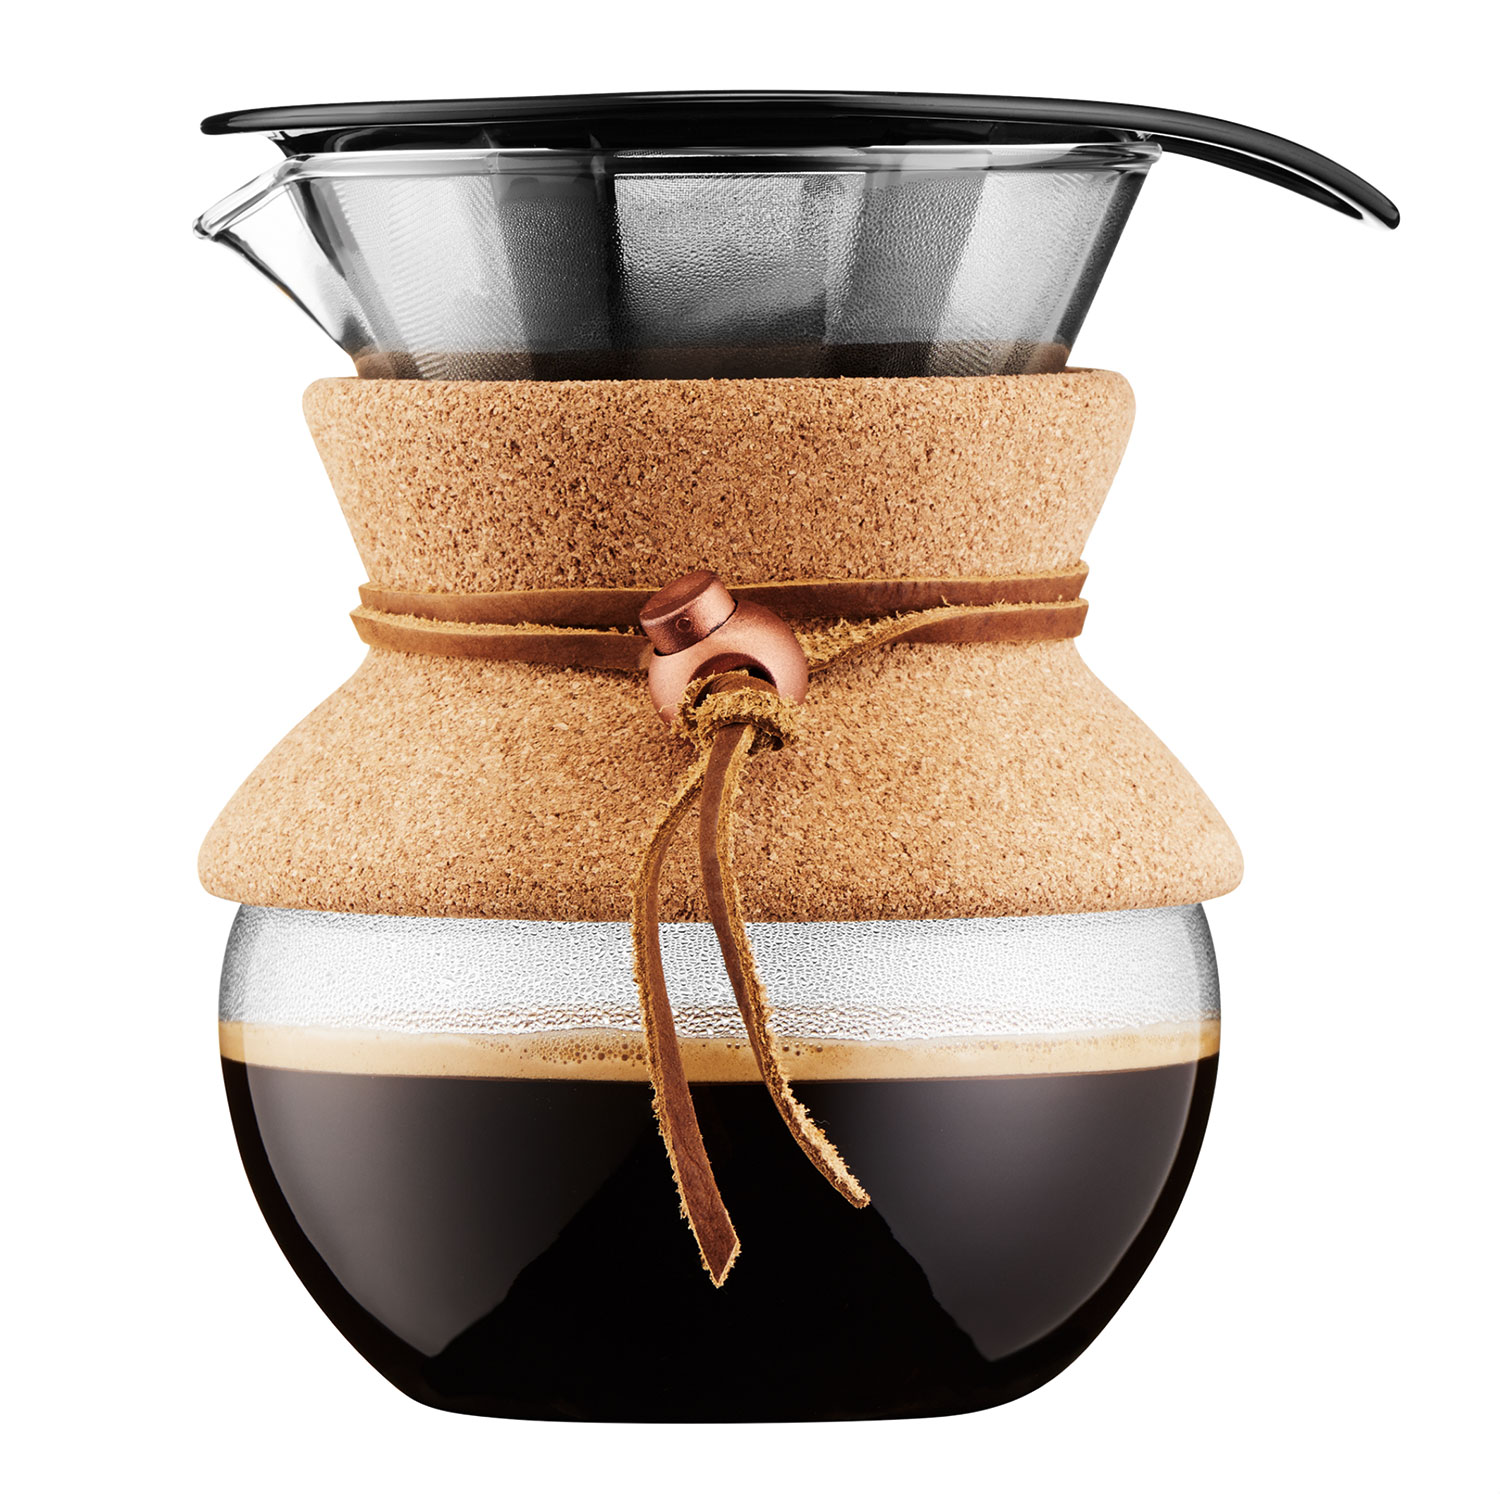 POUR OVER Kaffebryggare, 0,5 L